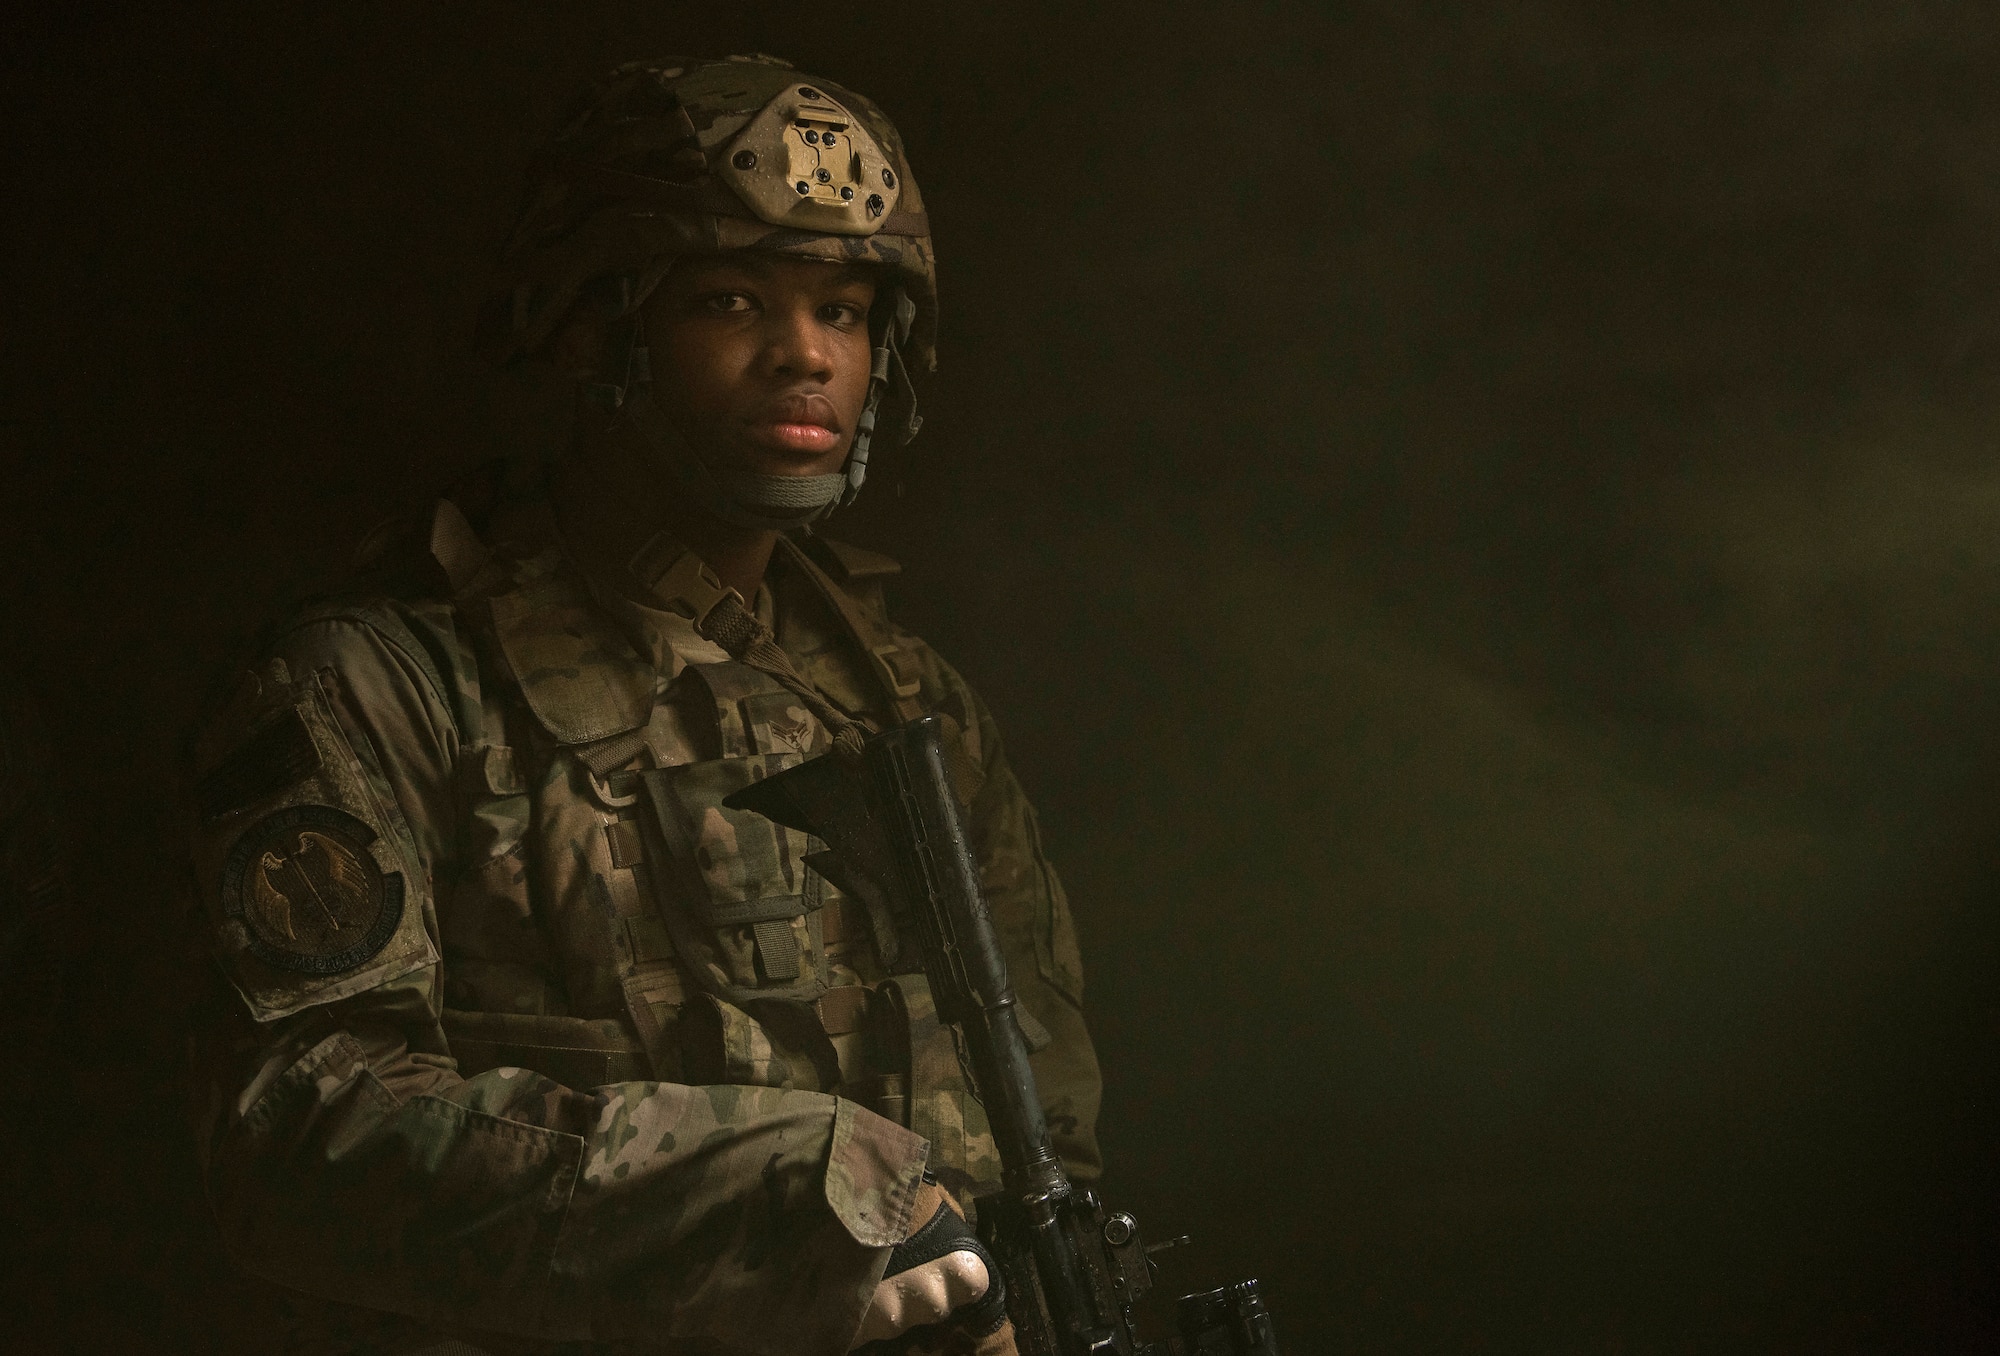 Airman 1st Class Daquan Hayes, 823rd Base Defense Squadron fire team member, Moody Air Force Base, Jan. 12, 2018. The 823rd is one of three operational security forces squadrons under the 820th Base Defense Group whose mission is to provide high-risk force protection and integrated base defense for expeditionary forces. (U.S. Air Force photo by Bennie J. Davis III)